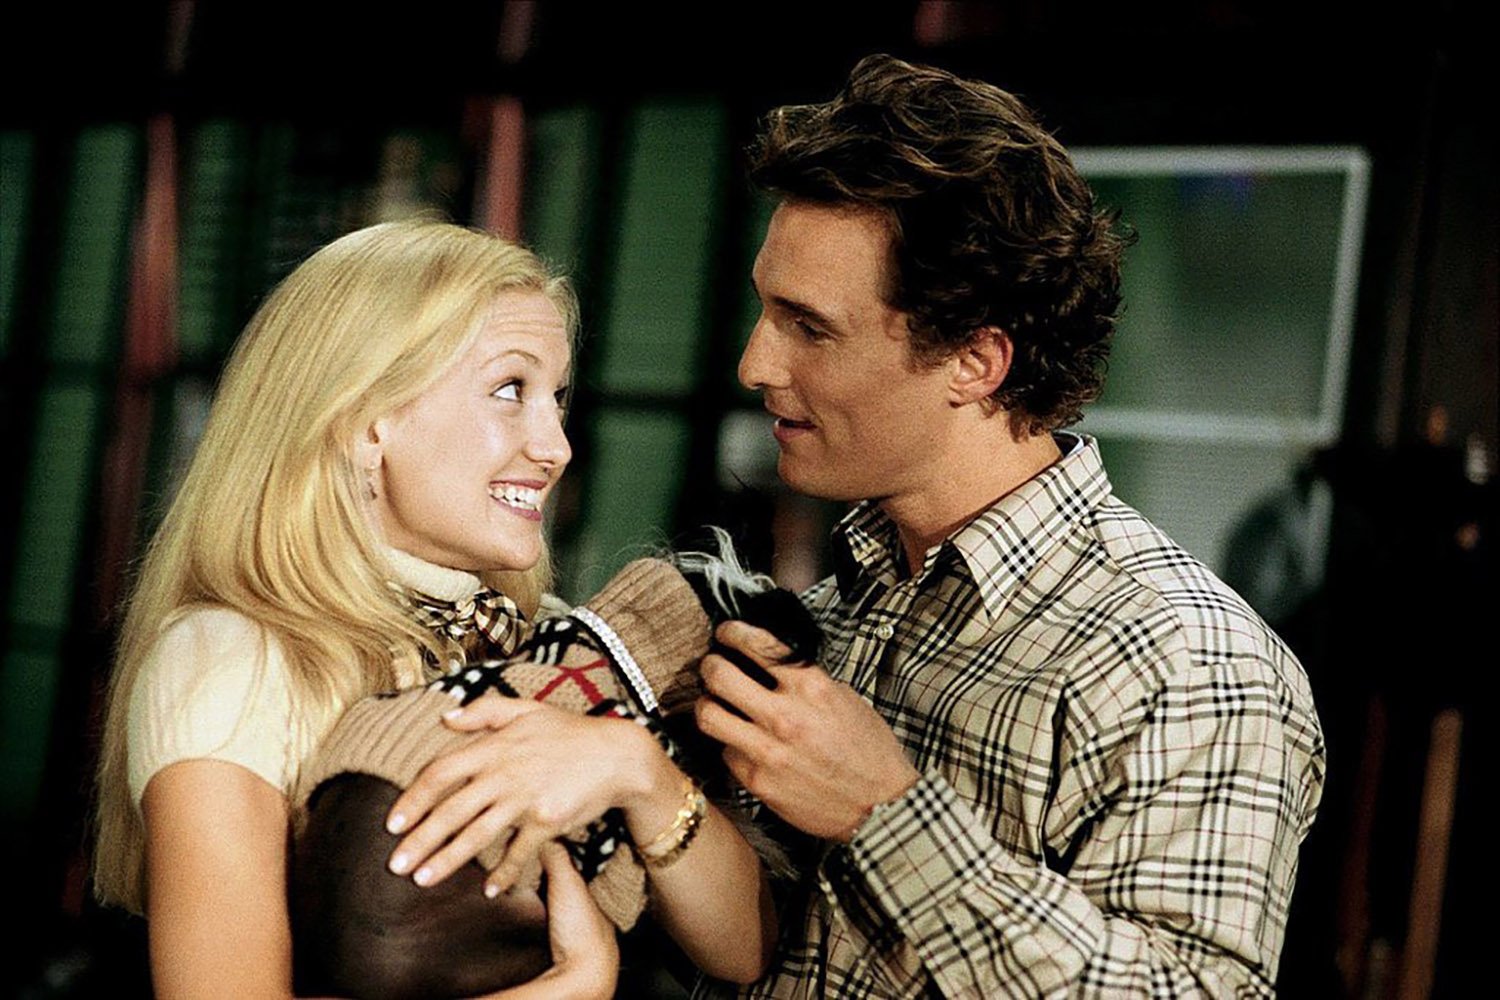 How to Lose a Guy in 10 Days: Kate Hudson as Andie holding a dog and Matthew McConaughey as Ben